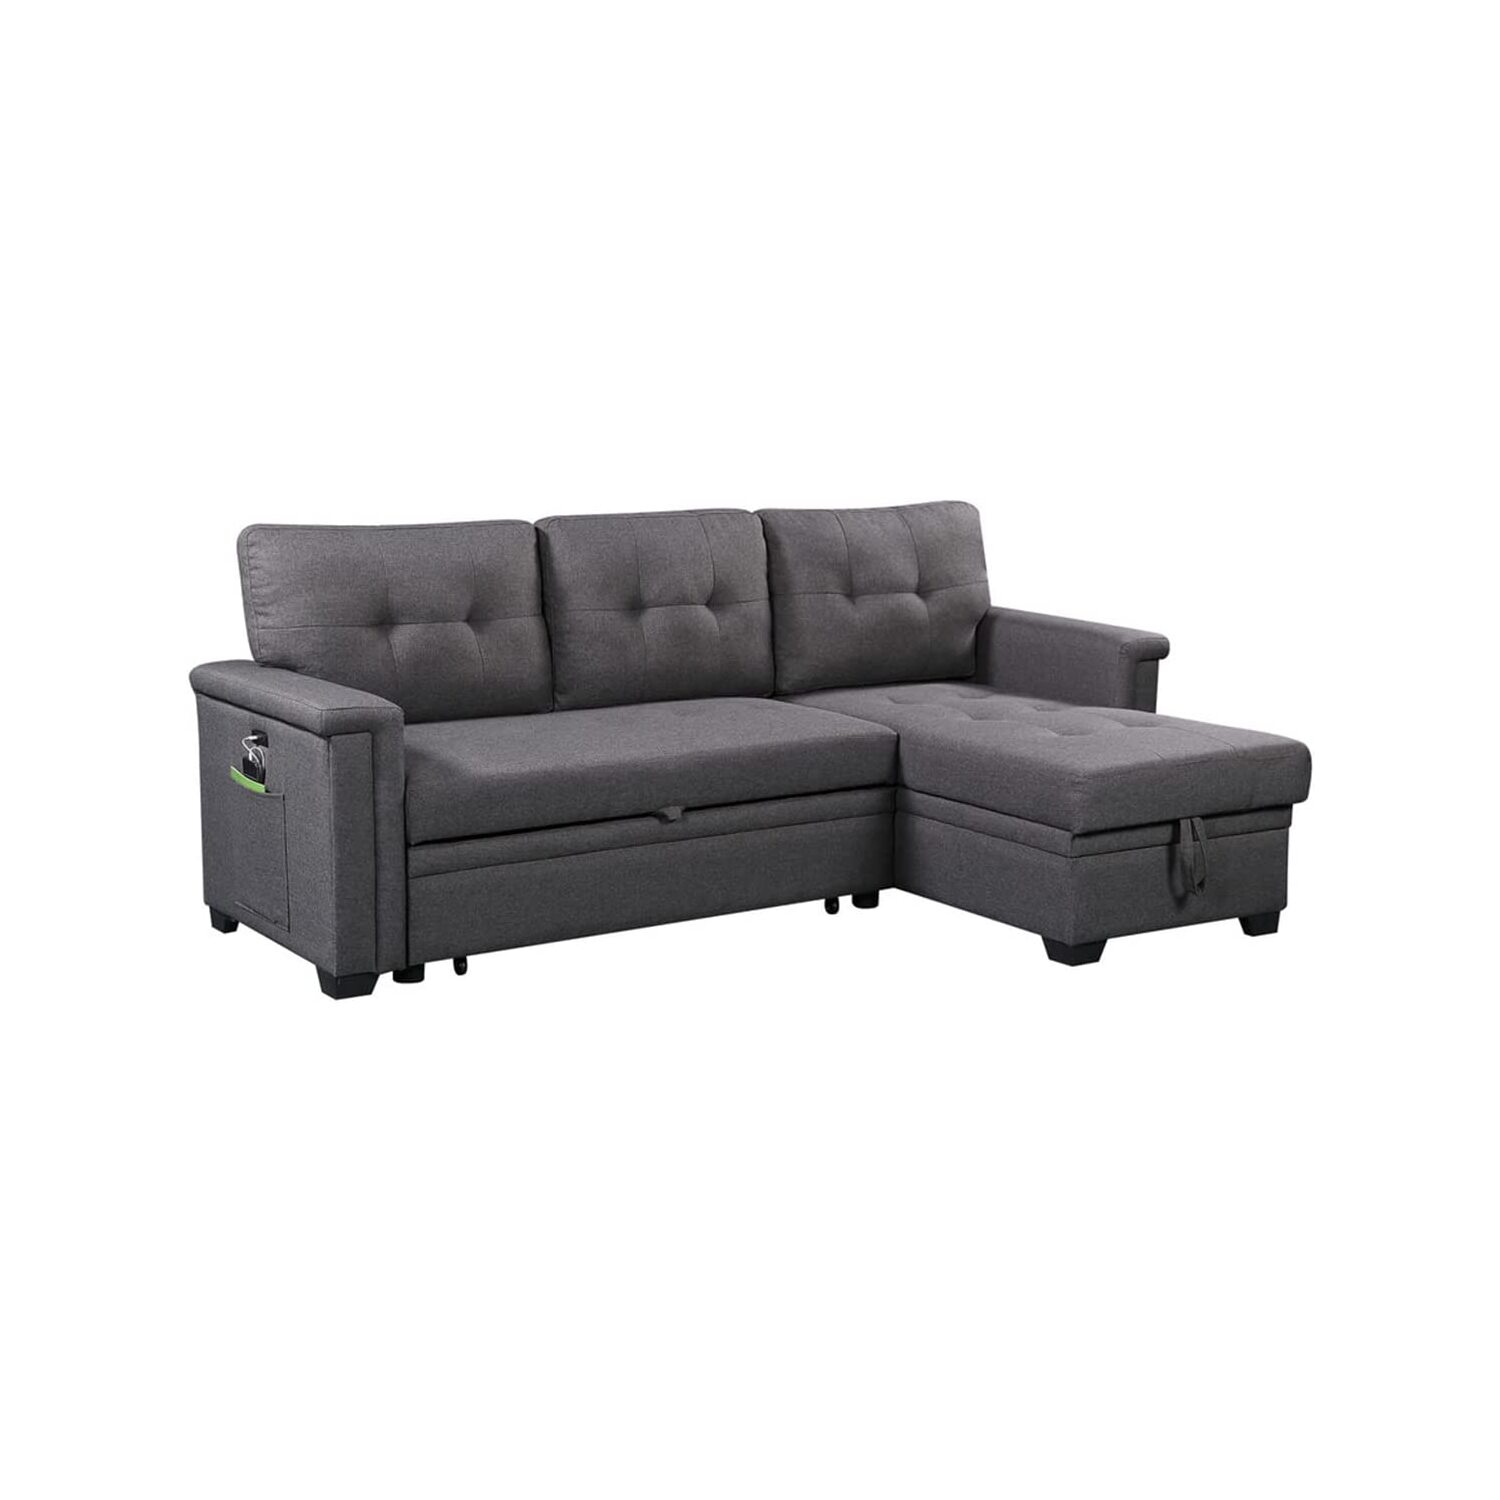 Lilola Home Sectional Sofa, Gray Cotton Blend - image 4 of 9